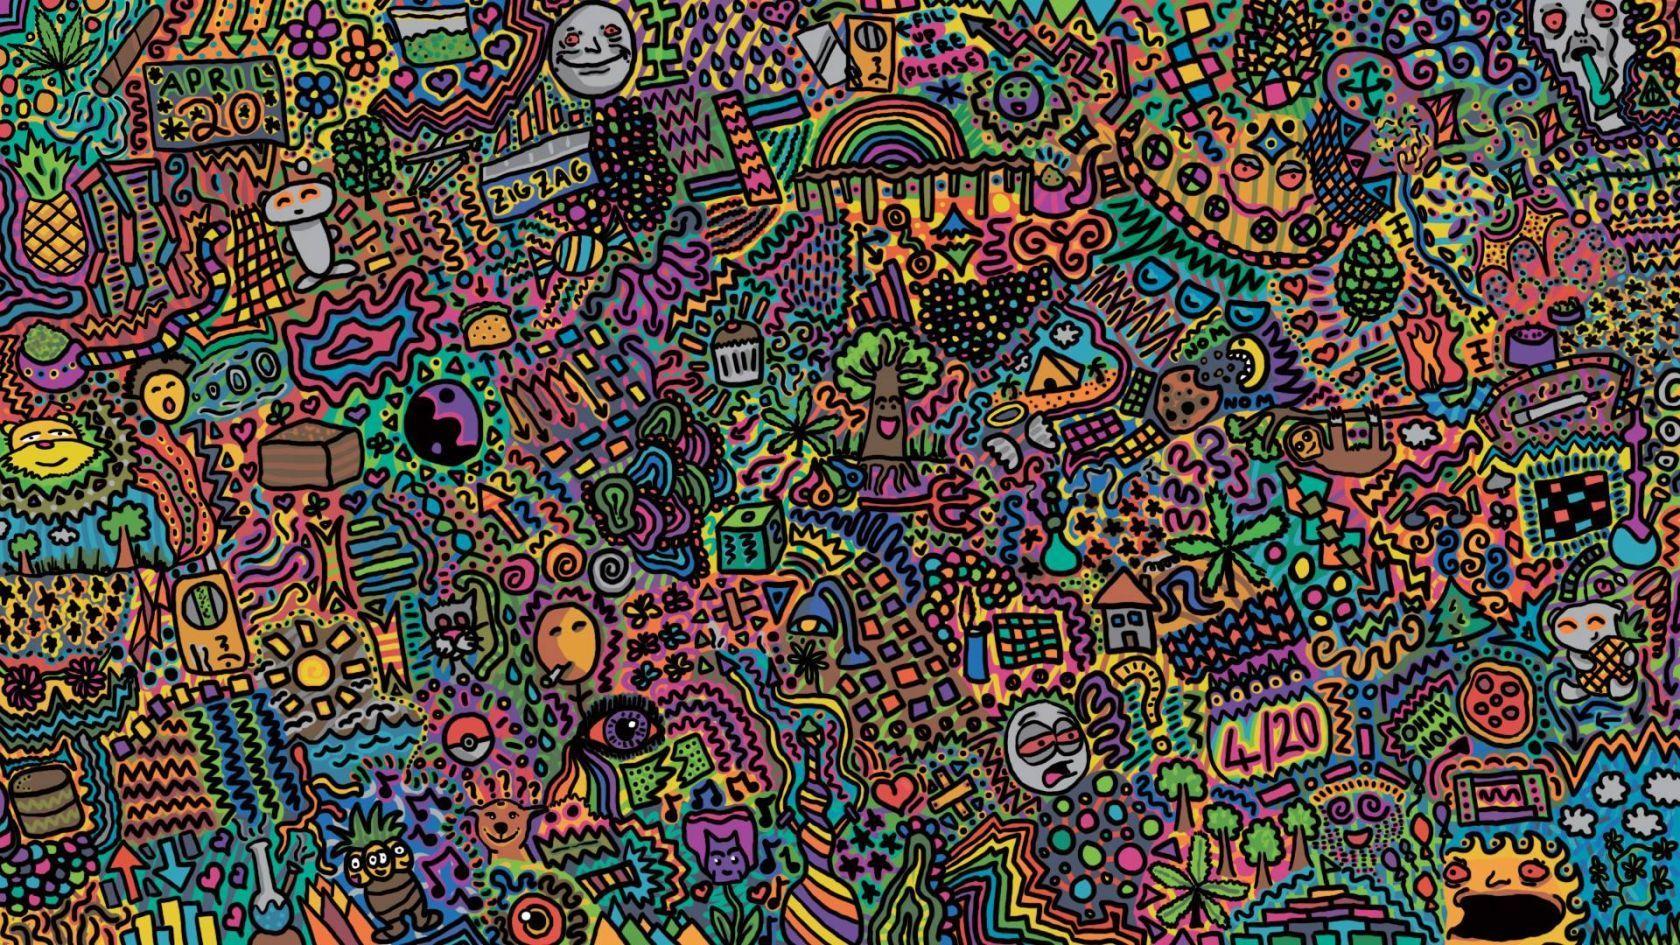 Awesome 45 Doodle Wallpaper. HQ Definition Pics BsnSCB Gallery